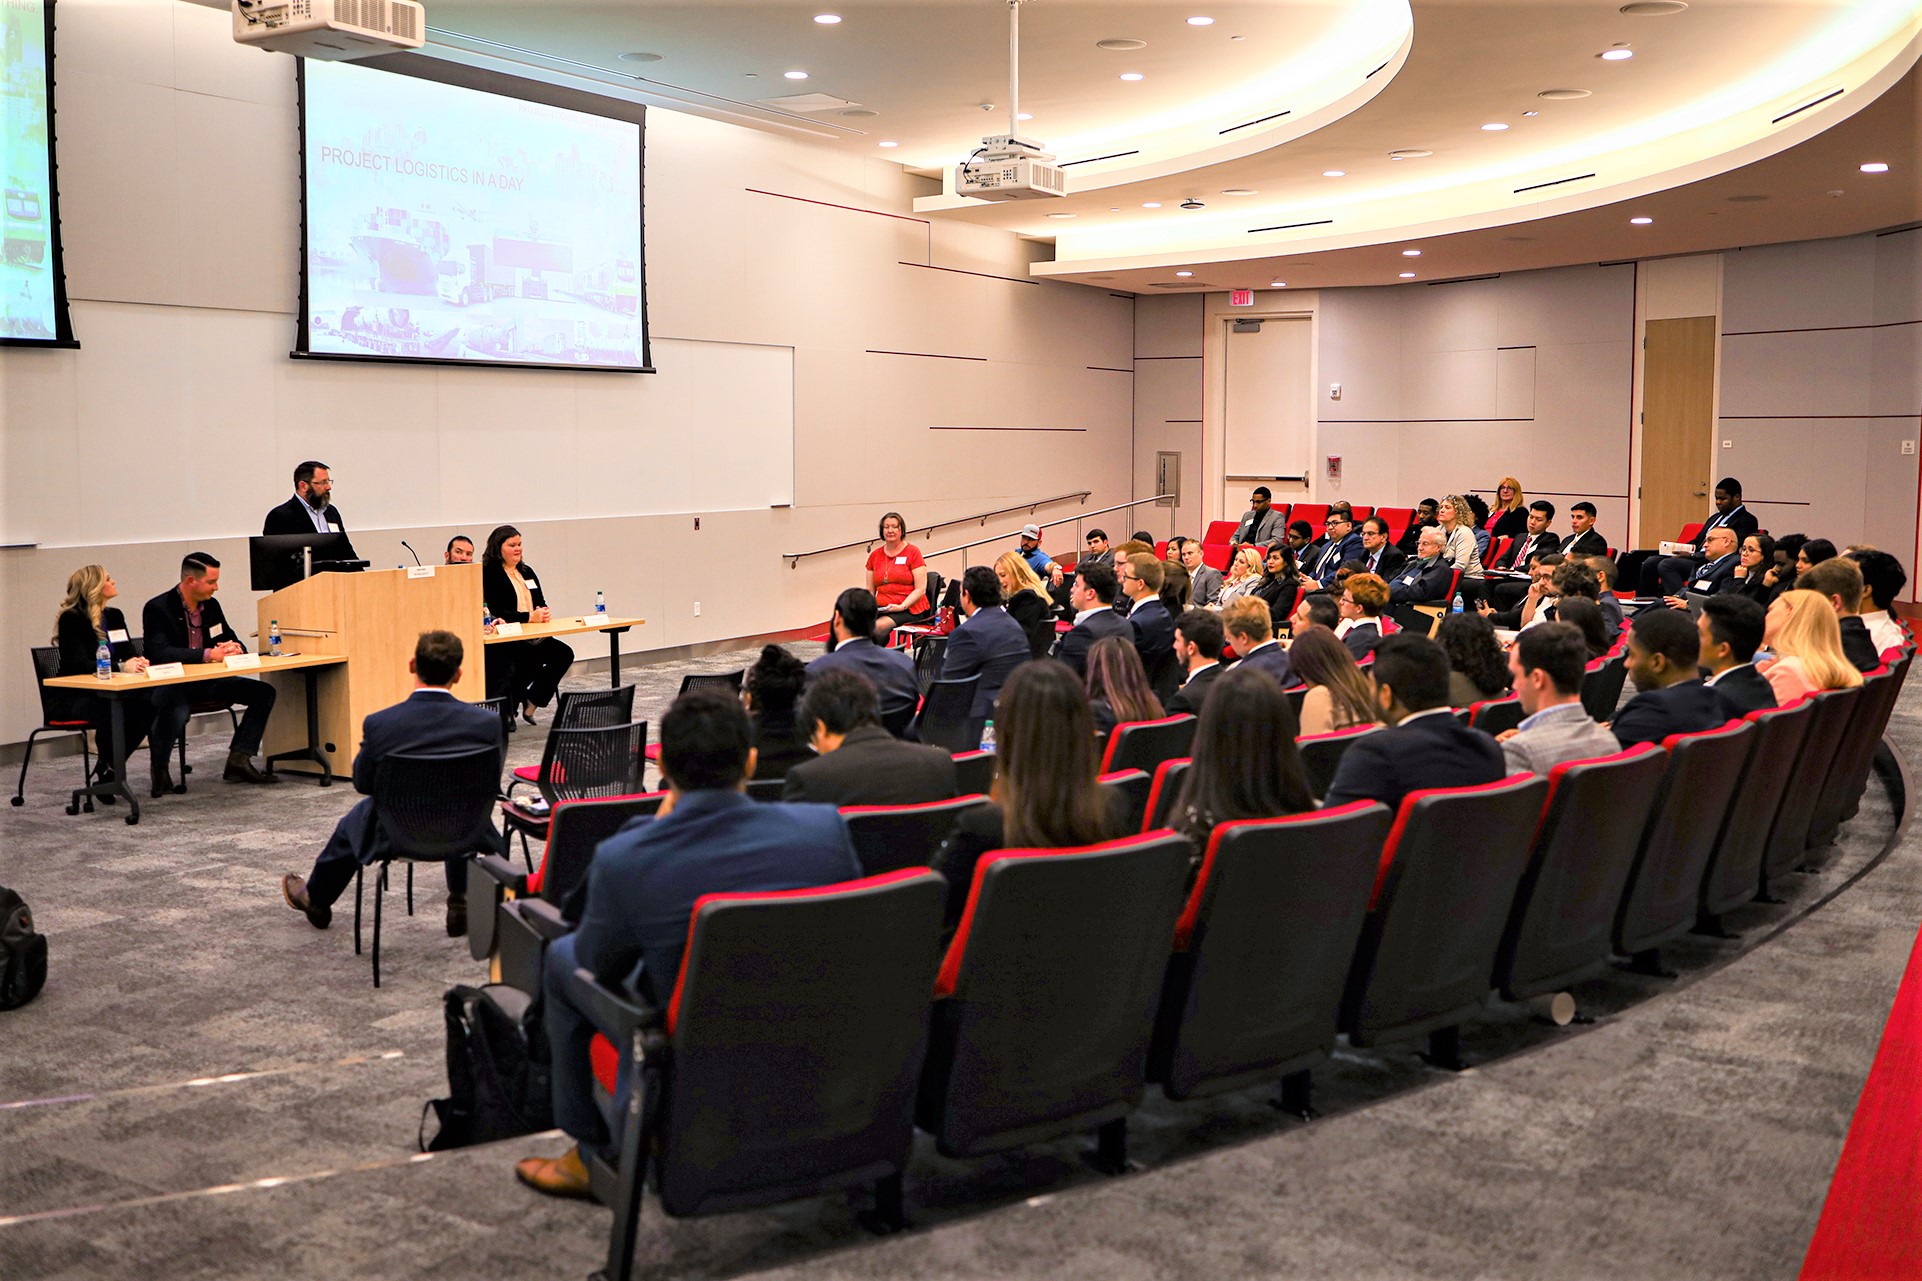 A group of people sit at the front of an auditorium classroom filled with students in business attire